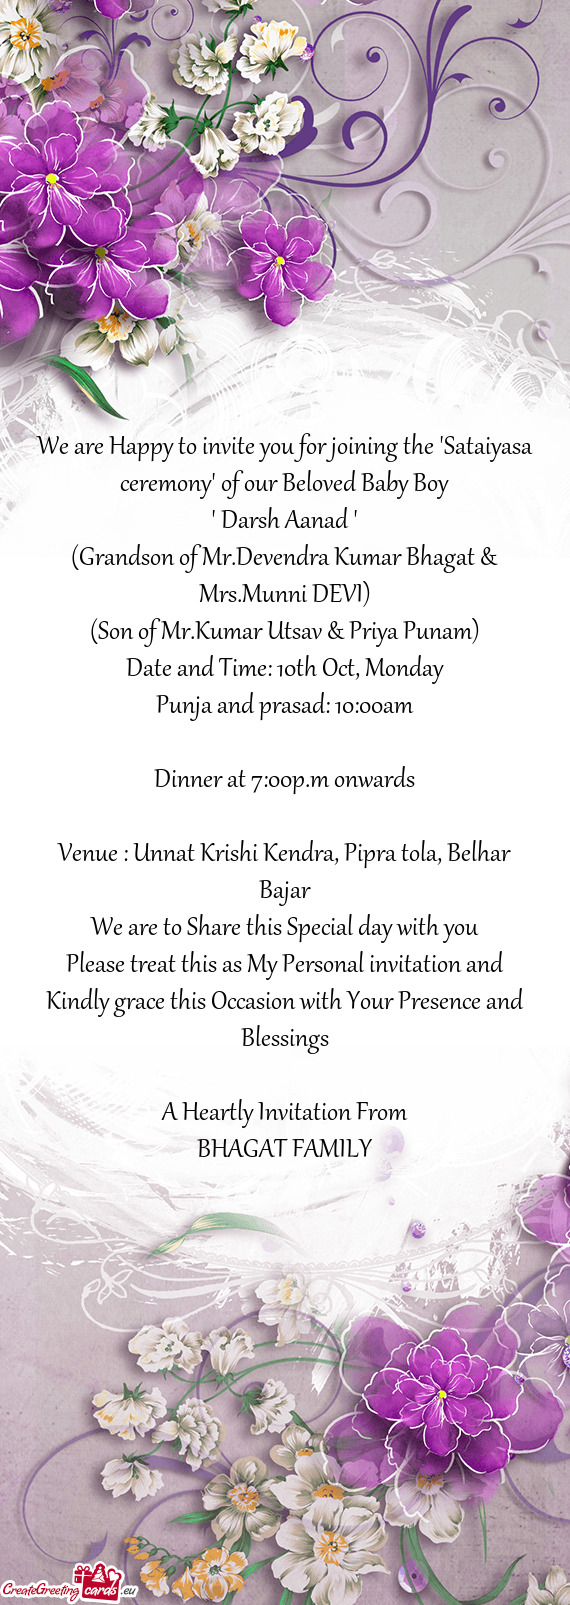 We are Happy to invite you for joining the "Sataiyasa ceremony" of our Beloved Baby Boy